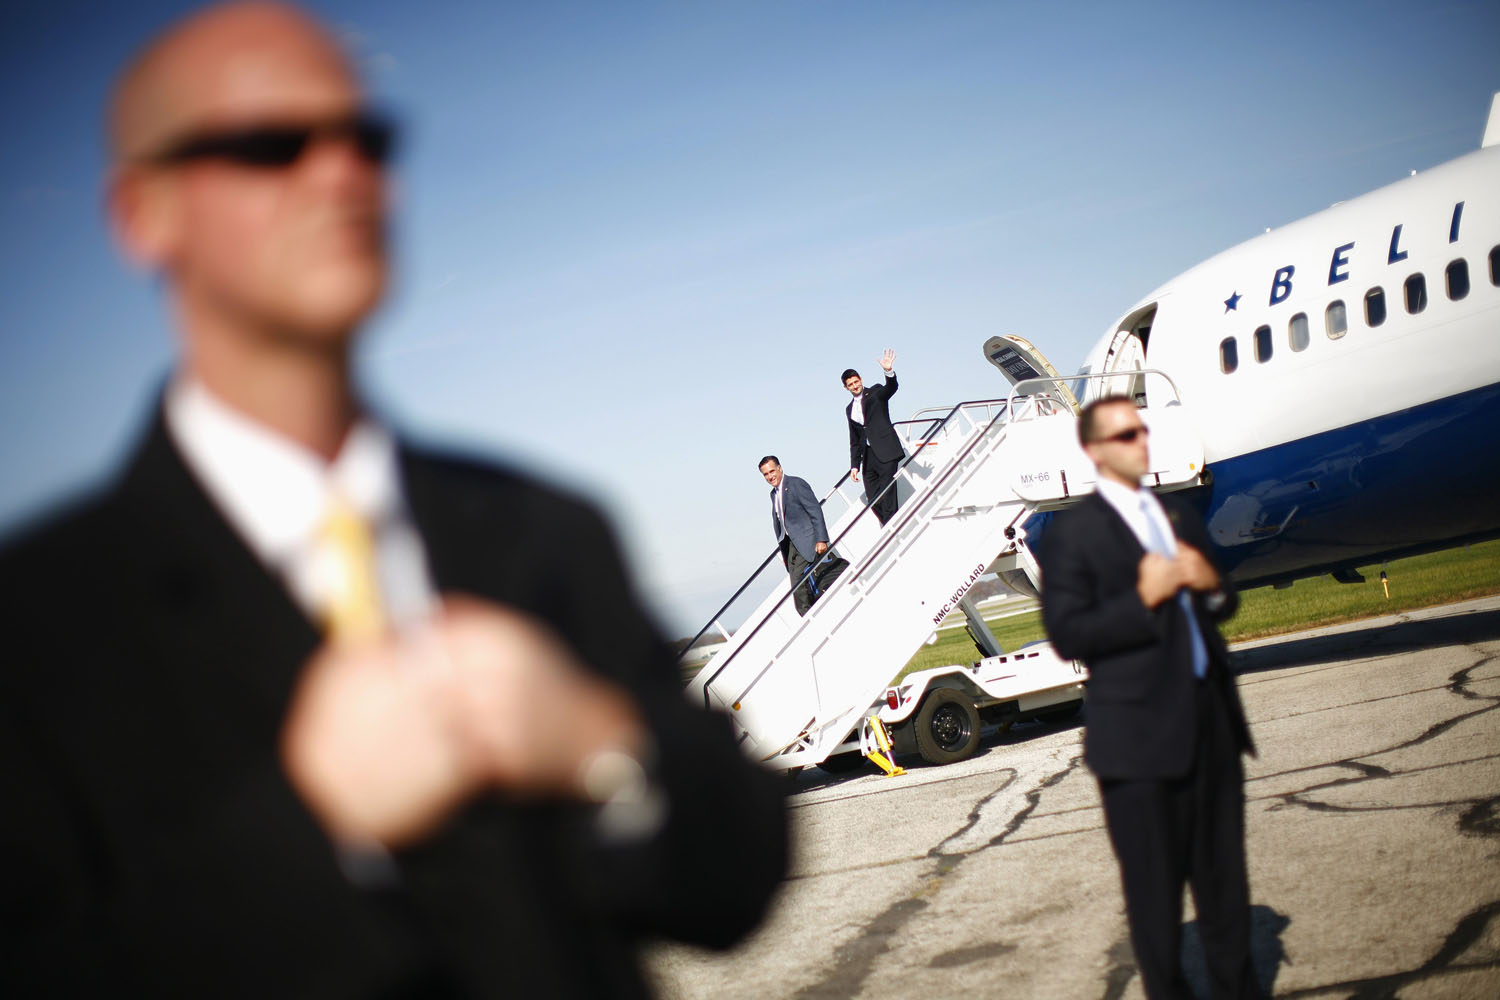 Image: Nov. 6, 2012. Republican vice presidential candidate Paul Ryan and Mitt Romney leave a campaign plane during the U.S. presidential election in Cleveland.